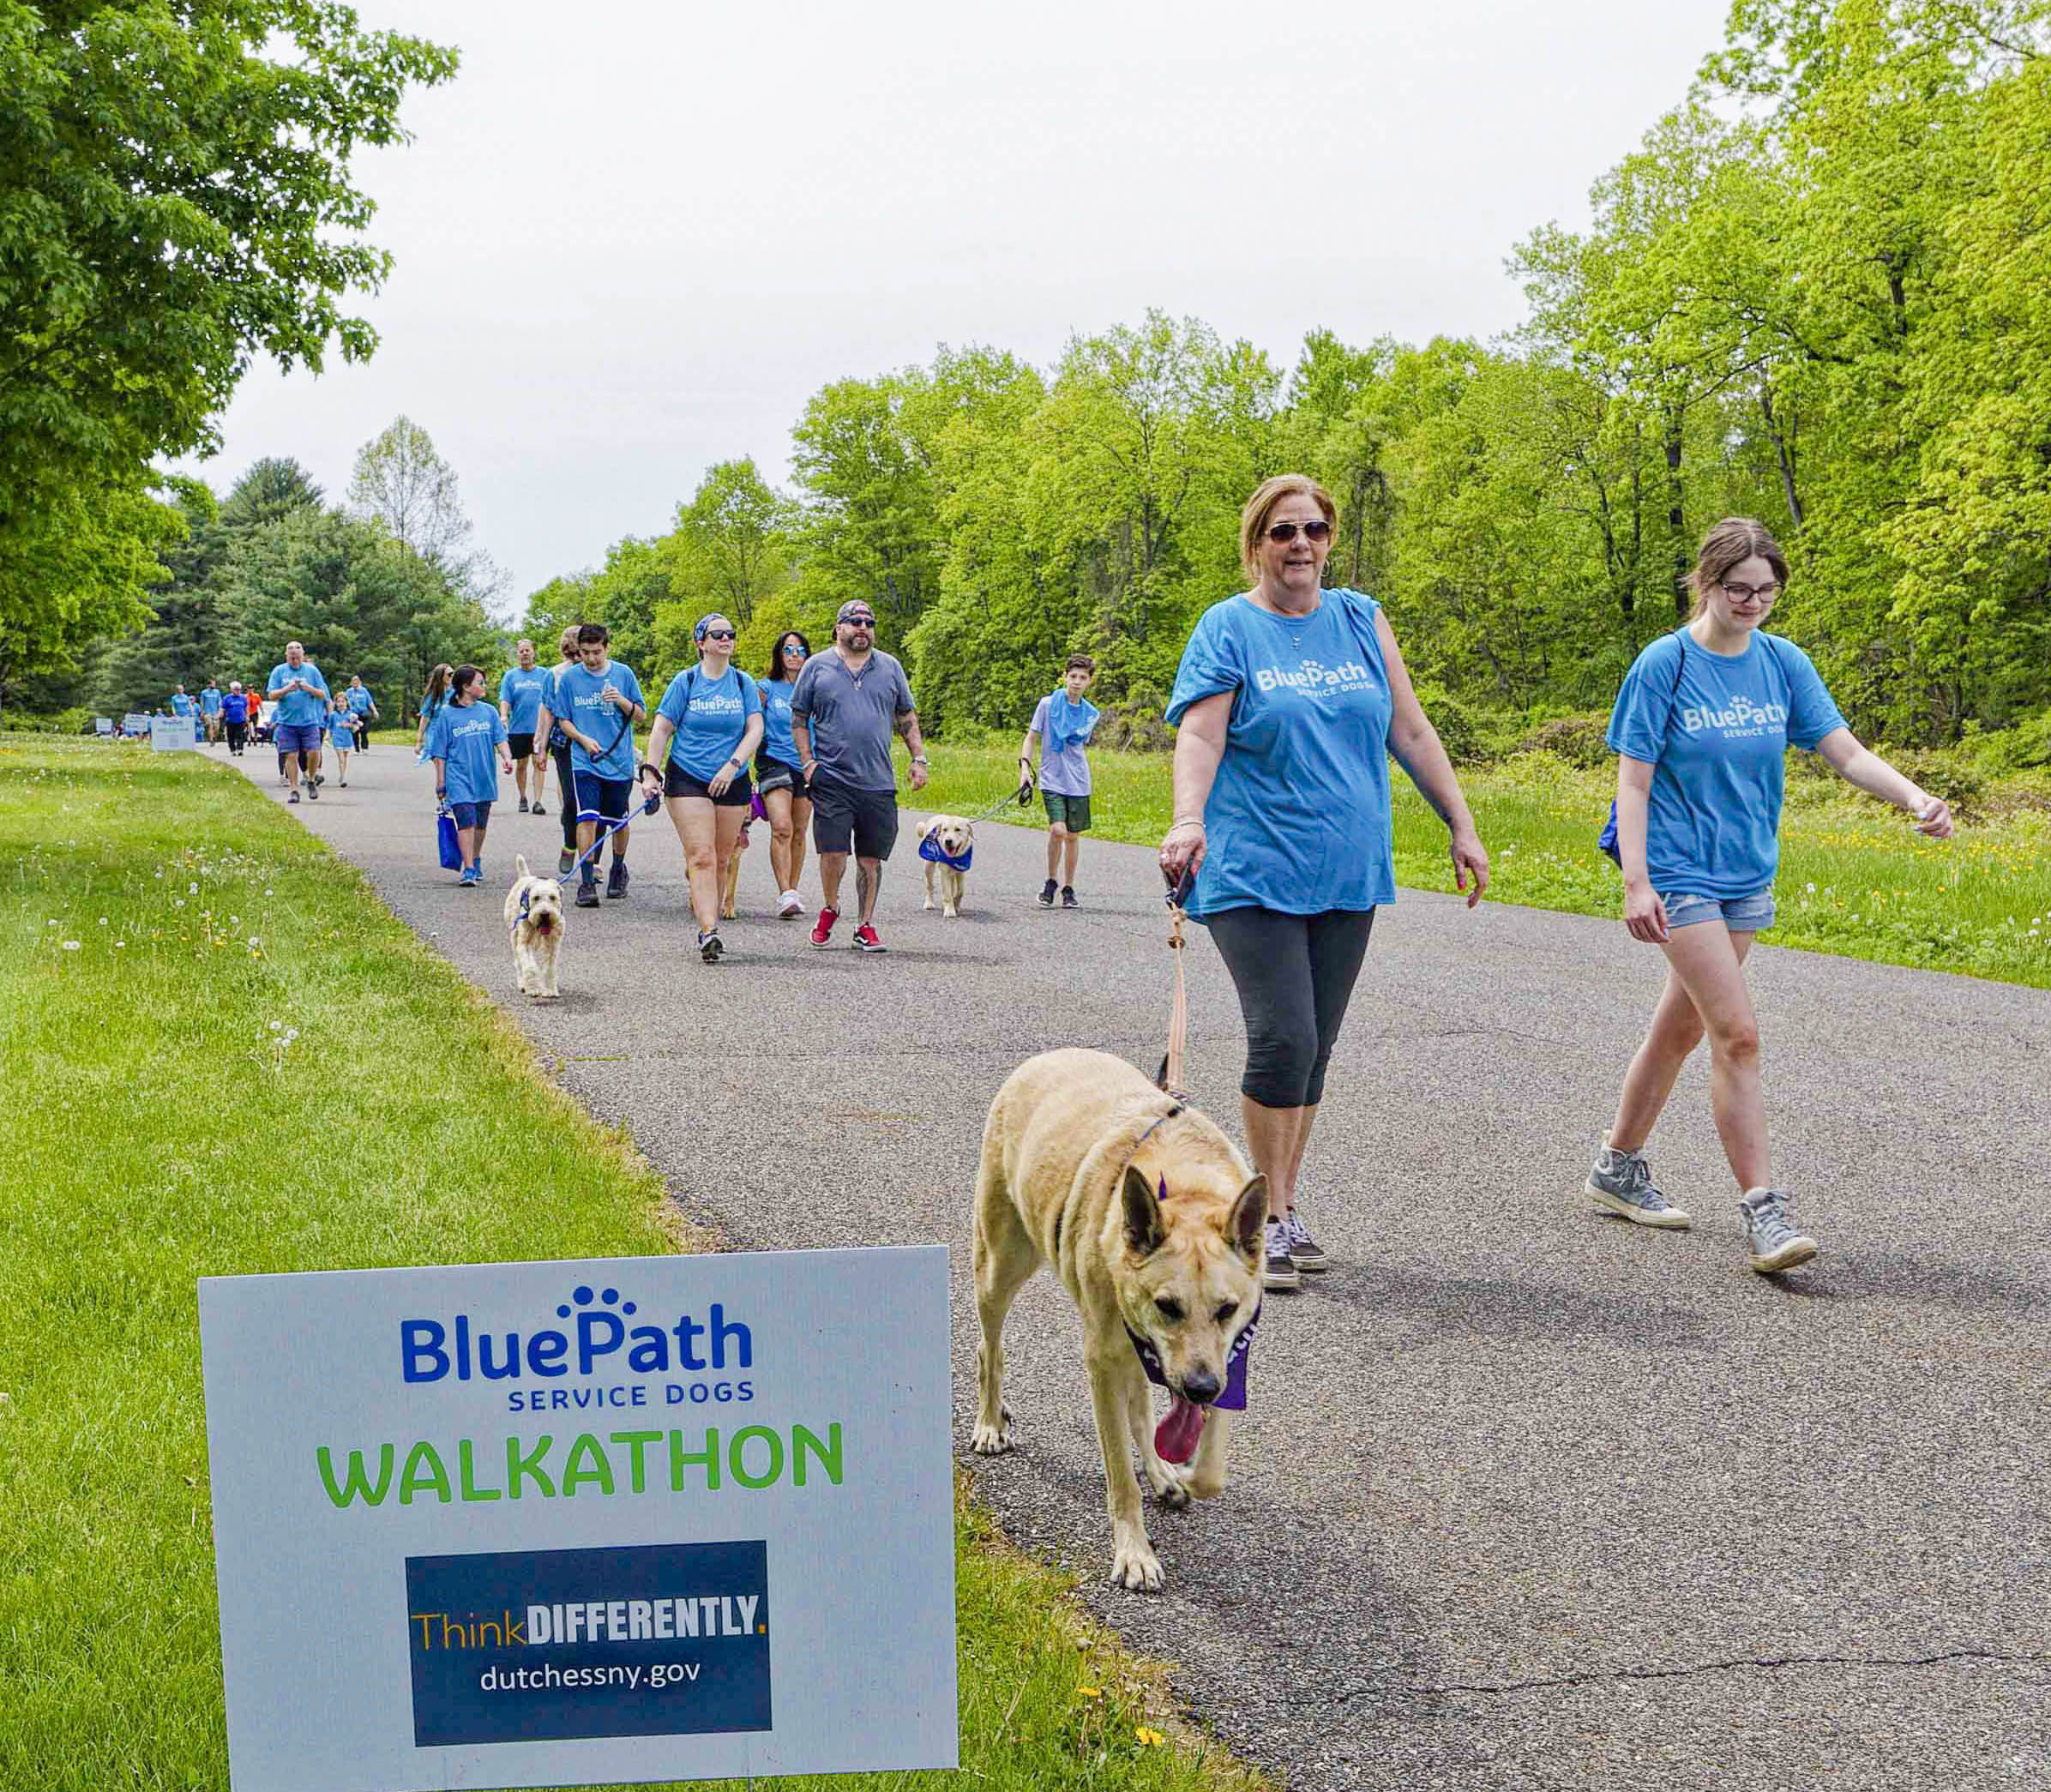 On May 13, 2023 BluePath Service Dogs held their Annual Walkathon at FDR Park in Yorktown. ThinkDIFFERENTLY was a sponsor and tabled at the event, which was attended by hundreds of people and maybe even more pups!! In this picture, a few teams, with their dogs, are walking the course by the ThinkDIFFERENTLY sponsorship sign.